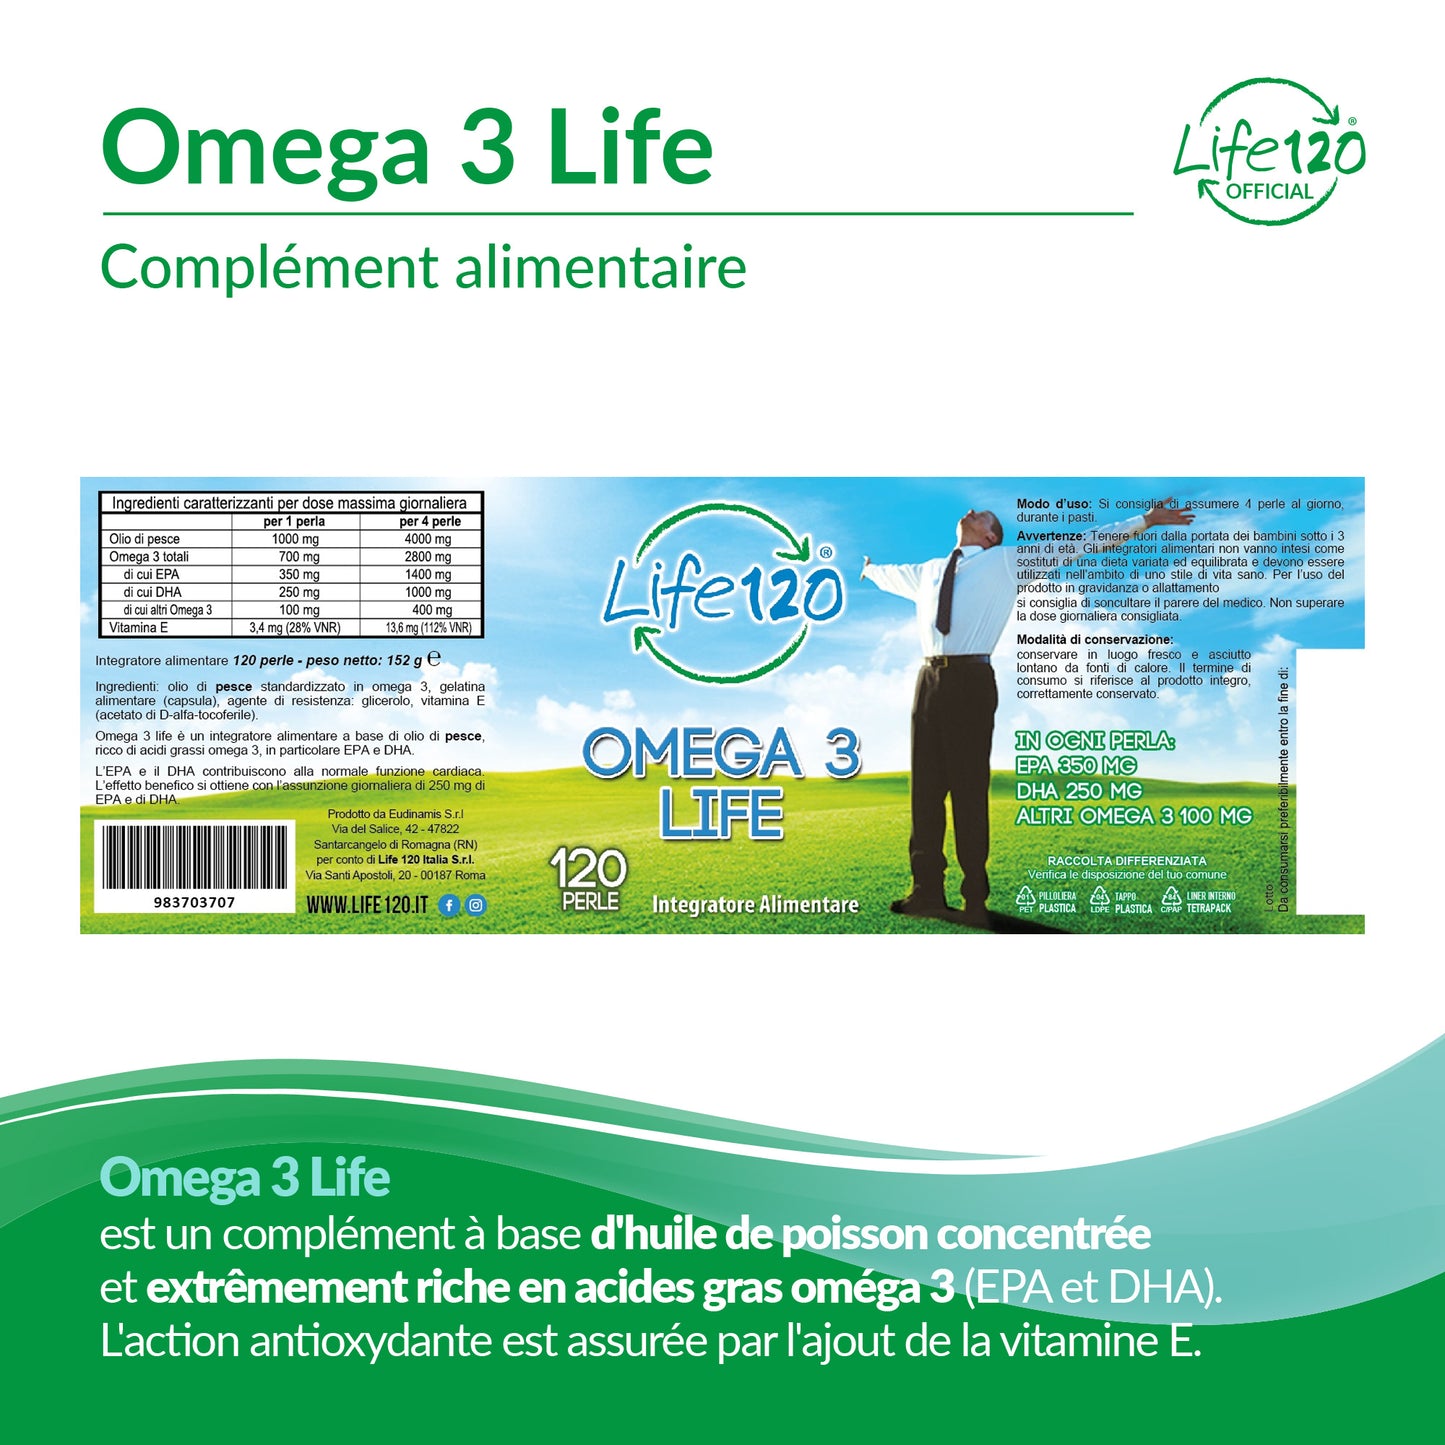 Life 120 - Omega 3 Life - 120 pearls - dietary supplement based on fish oil, rich in omega-3 fatty acids, especially EPA and DHA